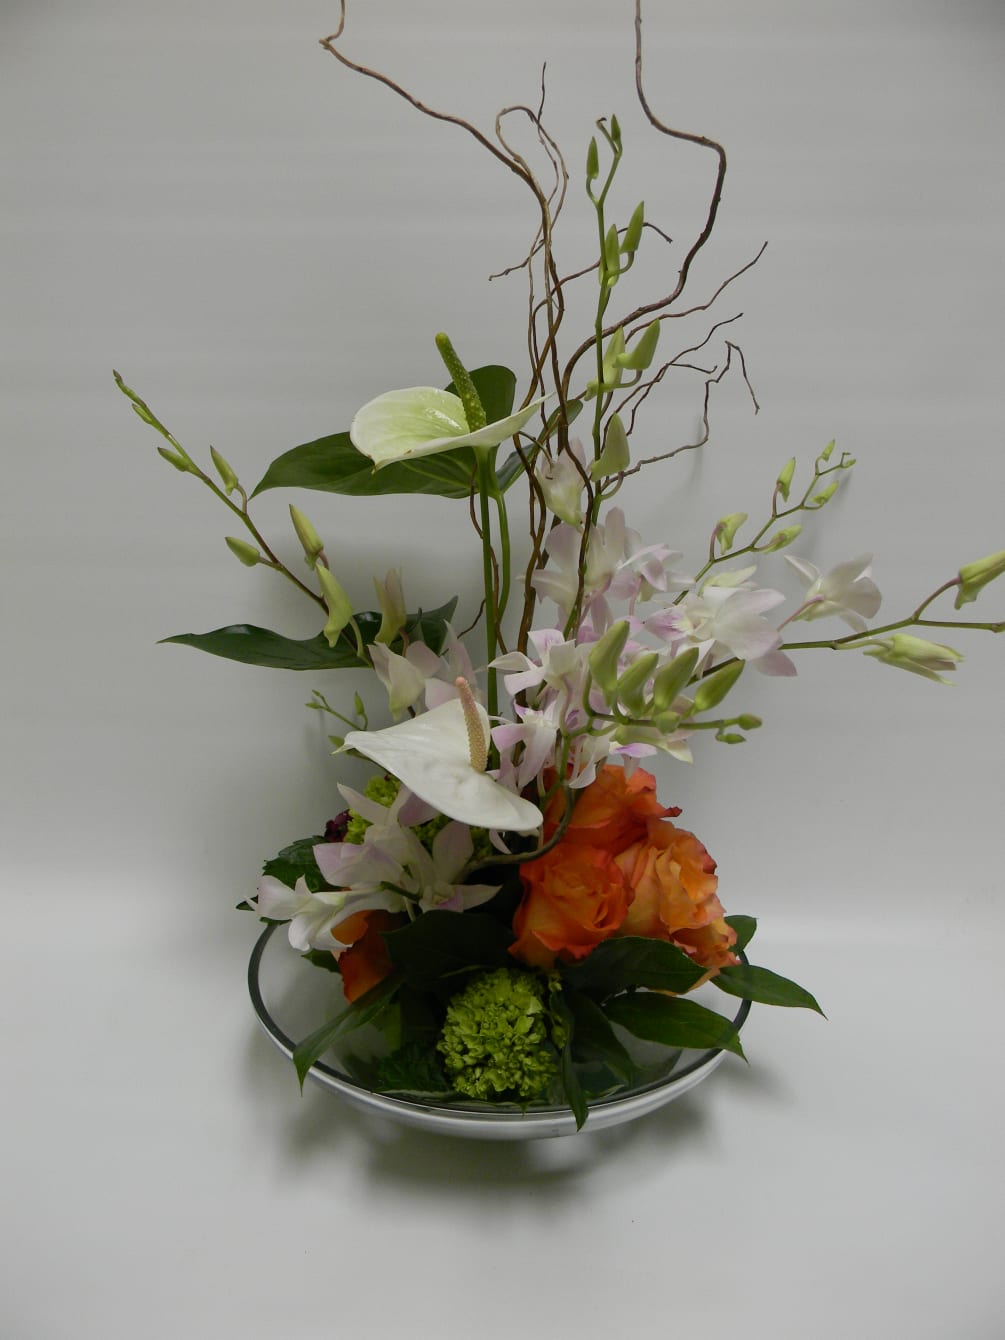 Anthurium, roses and hydrangea designed around curly willow in shallow glass bowl